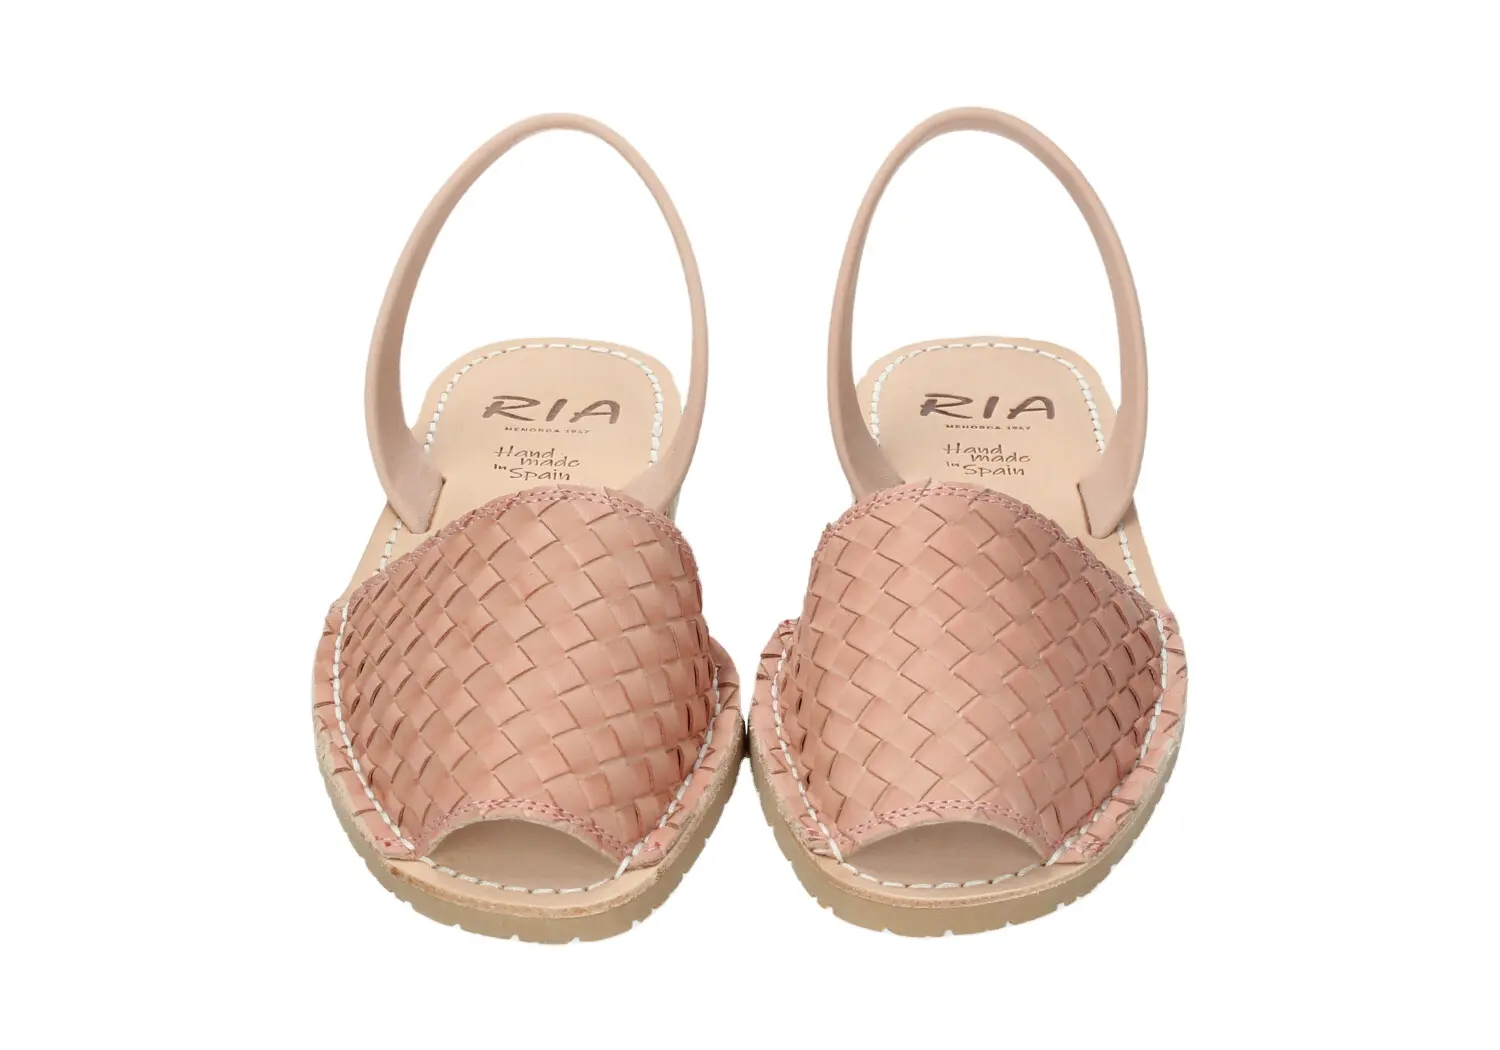 High quality handcrafted menorcan sandals made from pink genuine leather